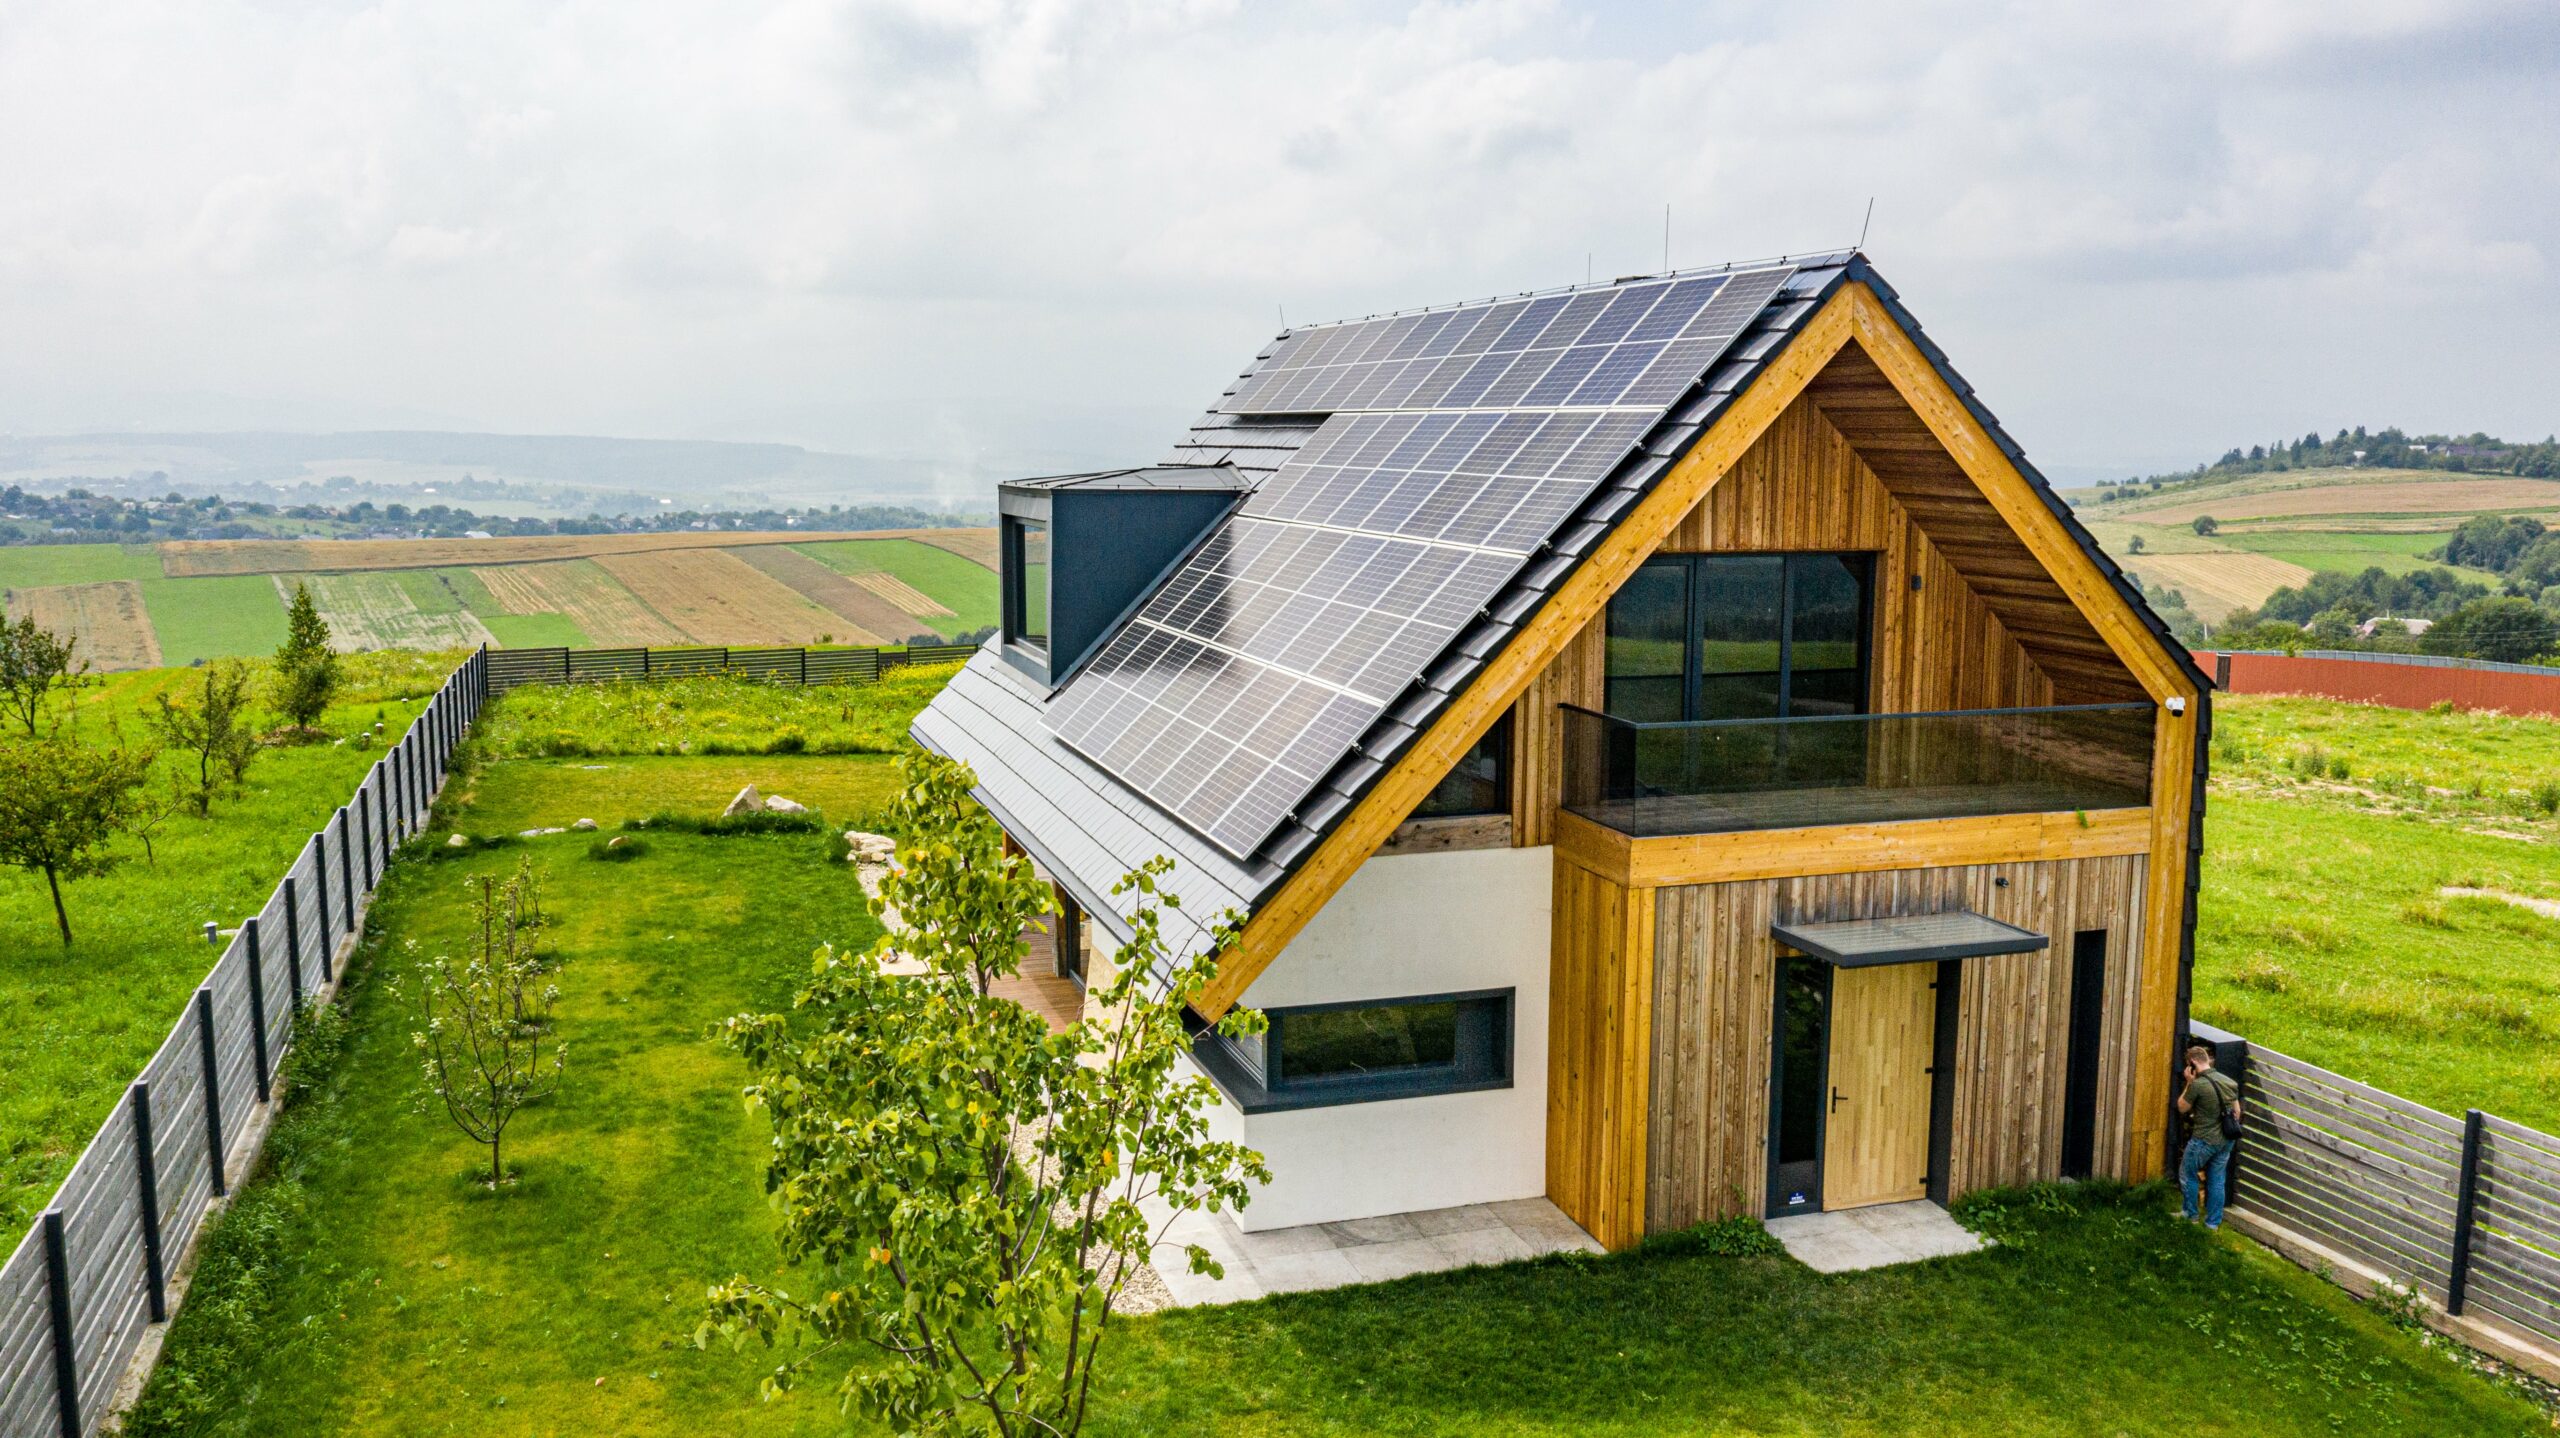 An energy efficient home with solar panels on the roof.